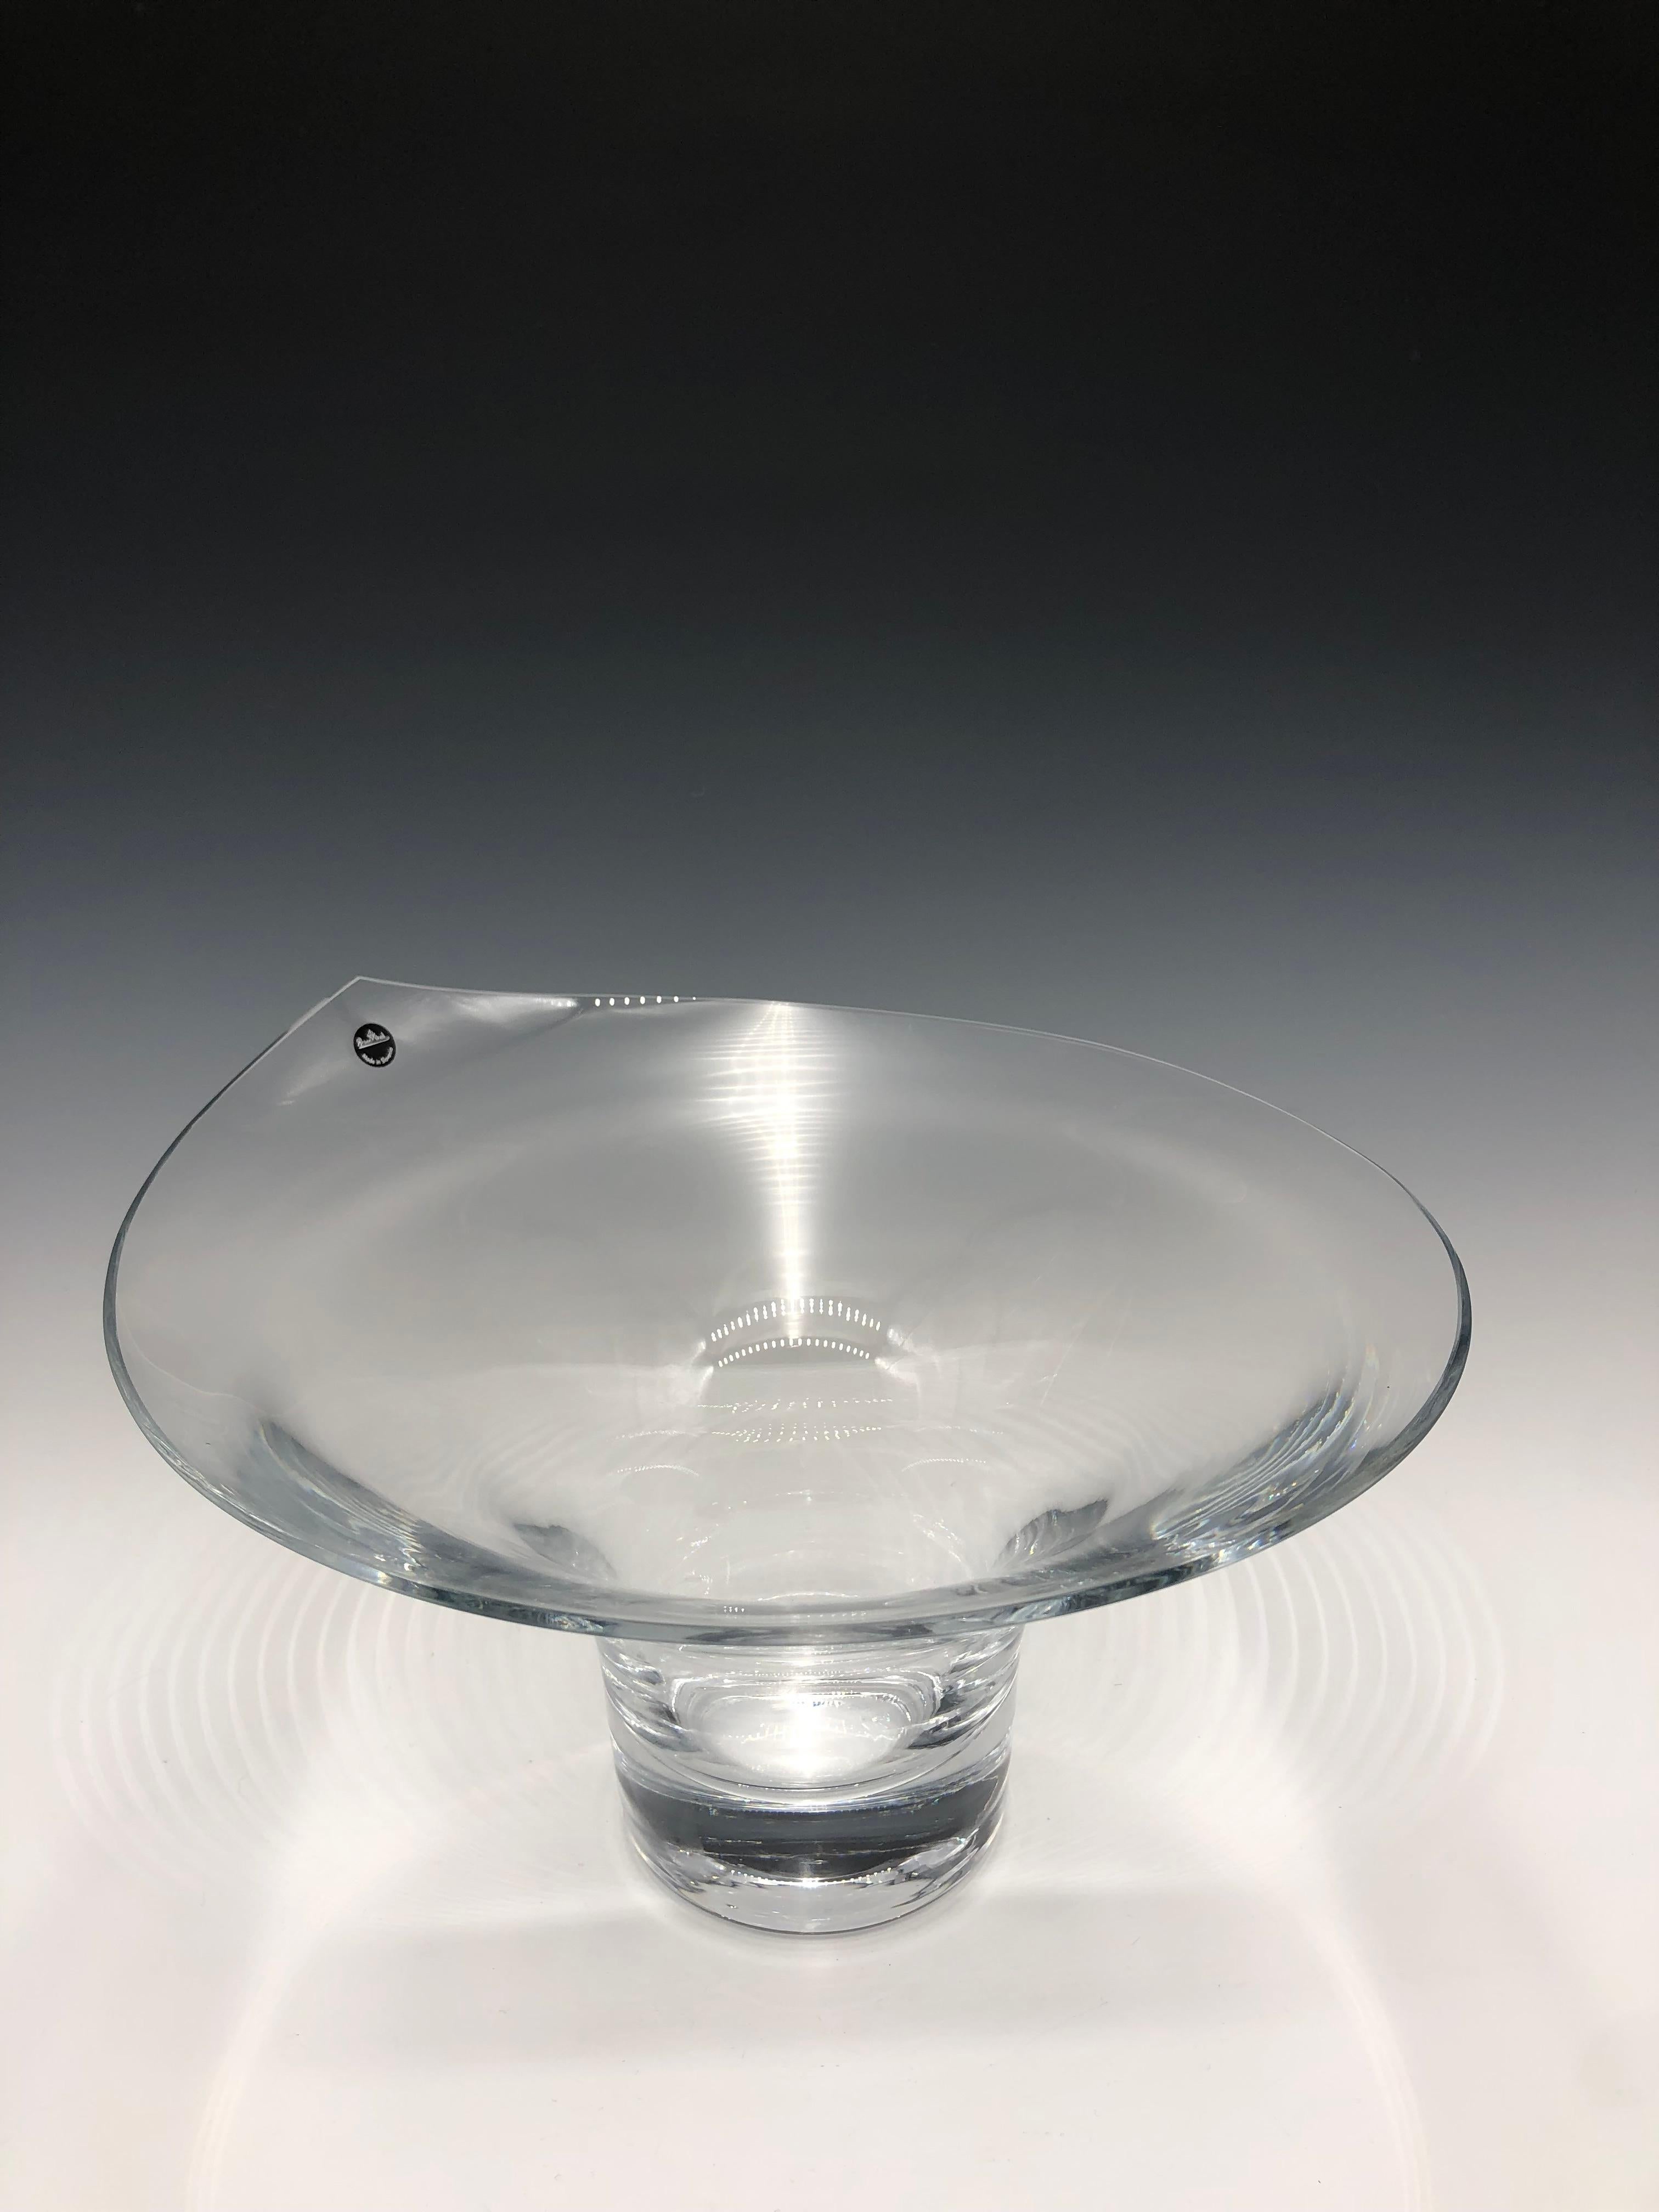 Clear Rosenthal Crystal Glass Calla Pedestal Bowl Centerpiece In Excellent Condition For Sale In East Quogue, NY